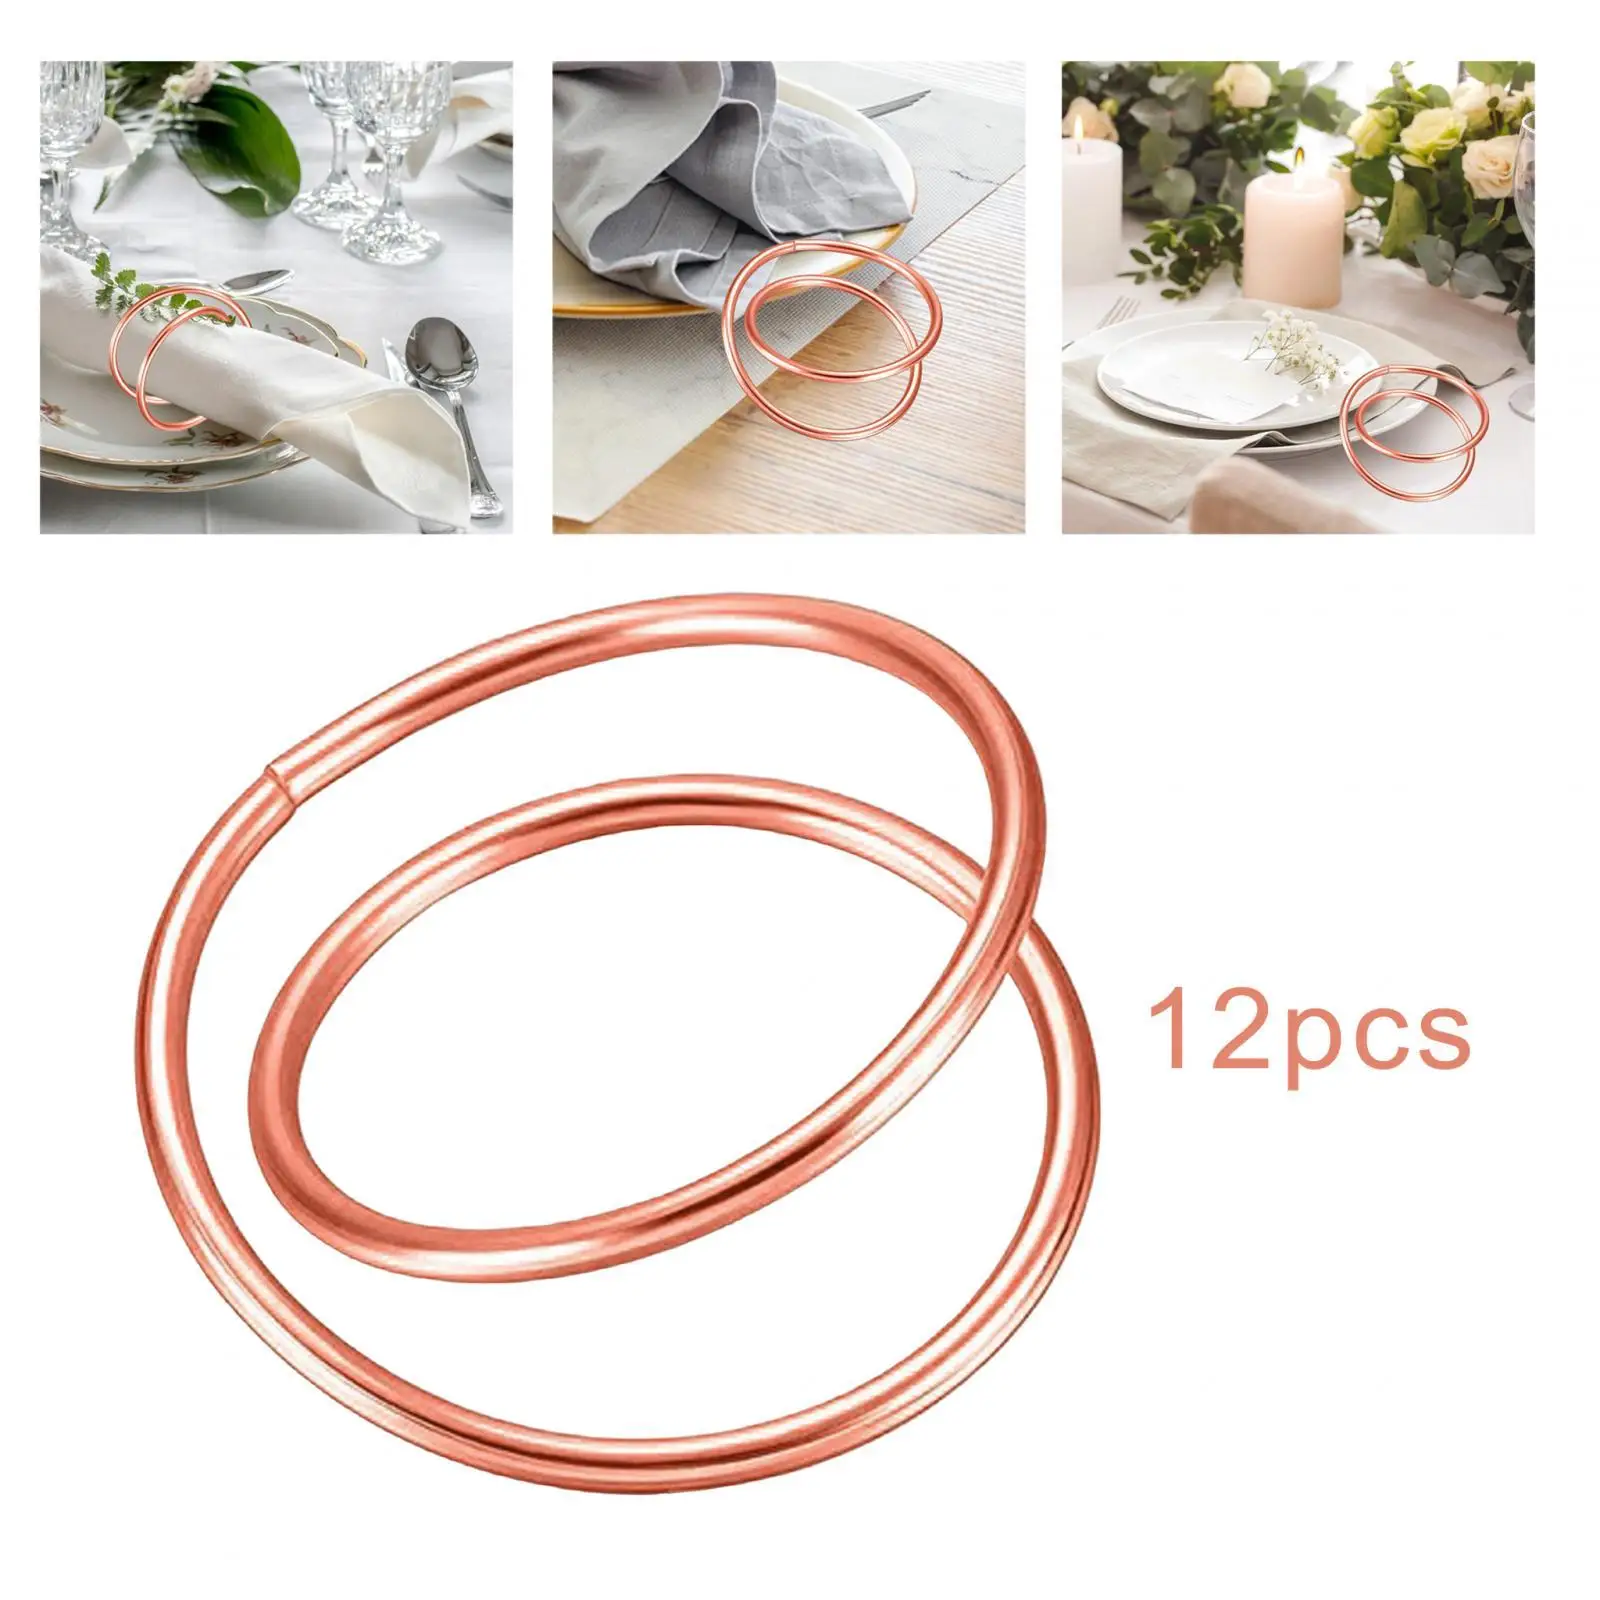 12Pcs Napkin Rings Stylish Ornament Table Setting Cafe Reception Adornment Tablecloth Accessories Bar Anniversary Napkin Bands